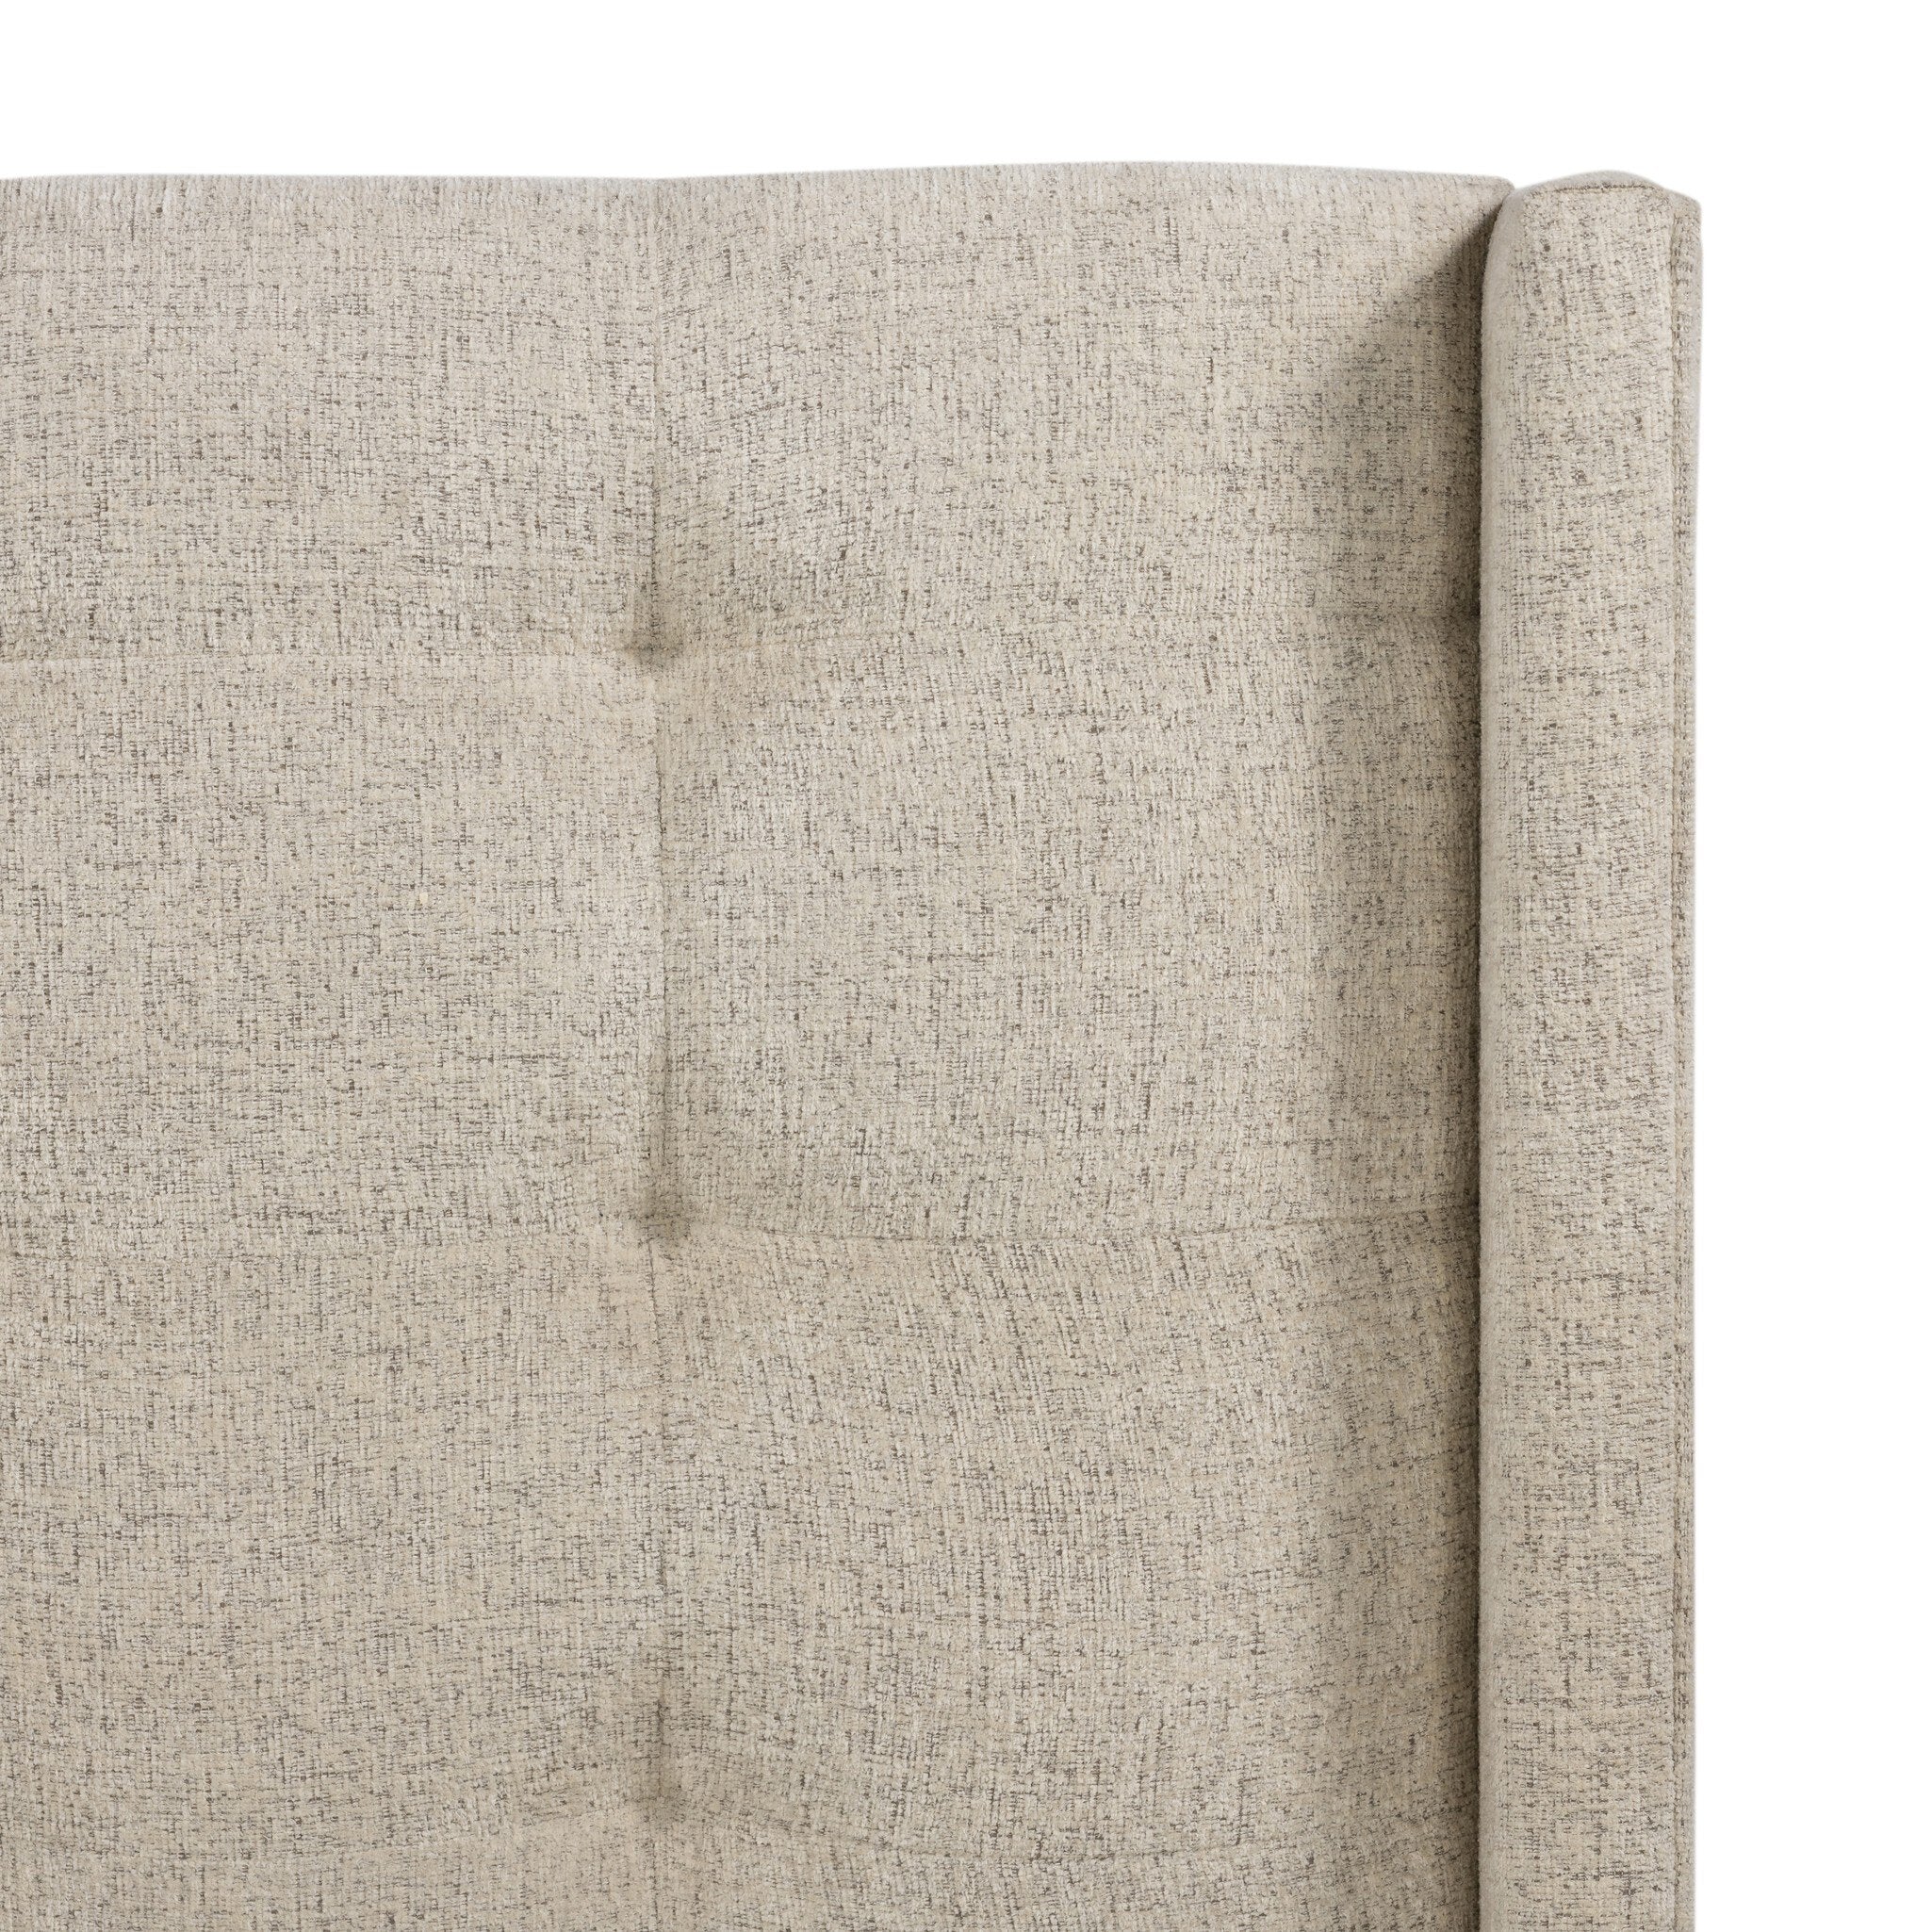 Newhall Bed Plushtown Linen - multiple options